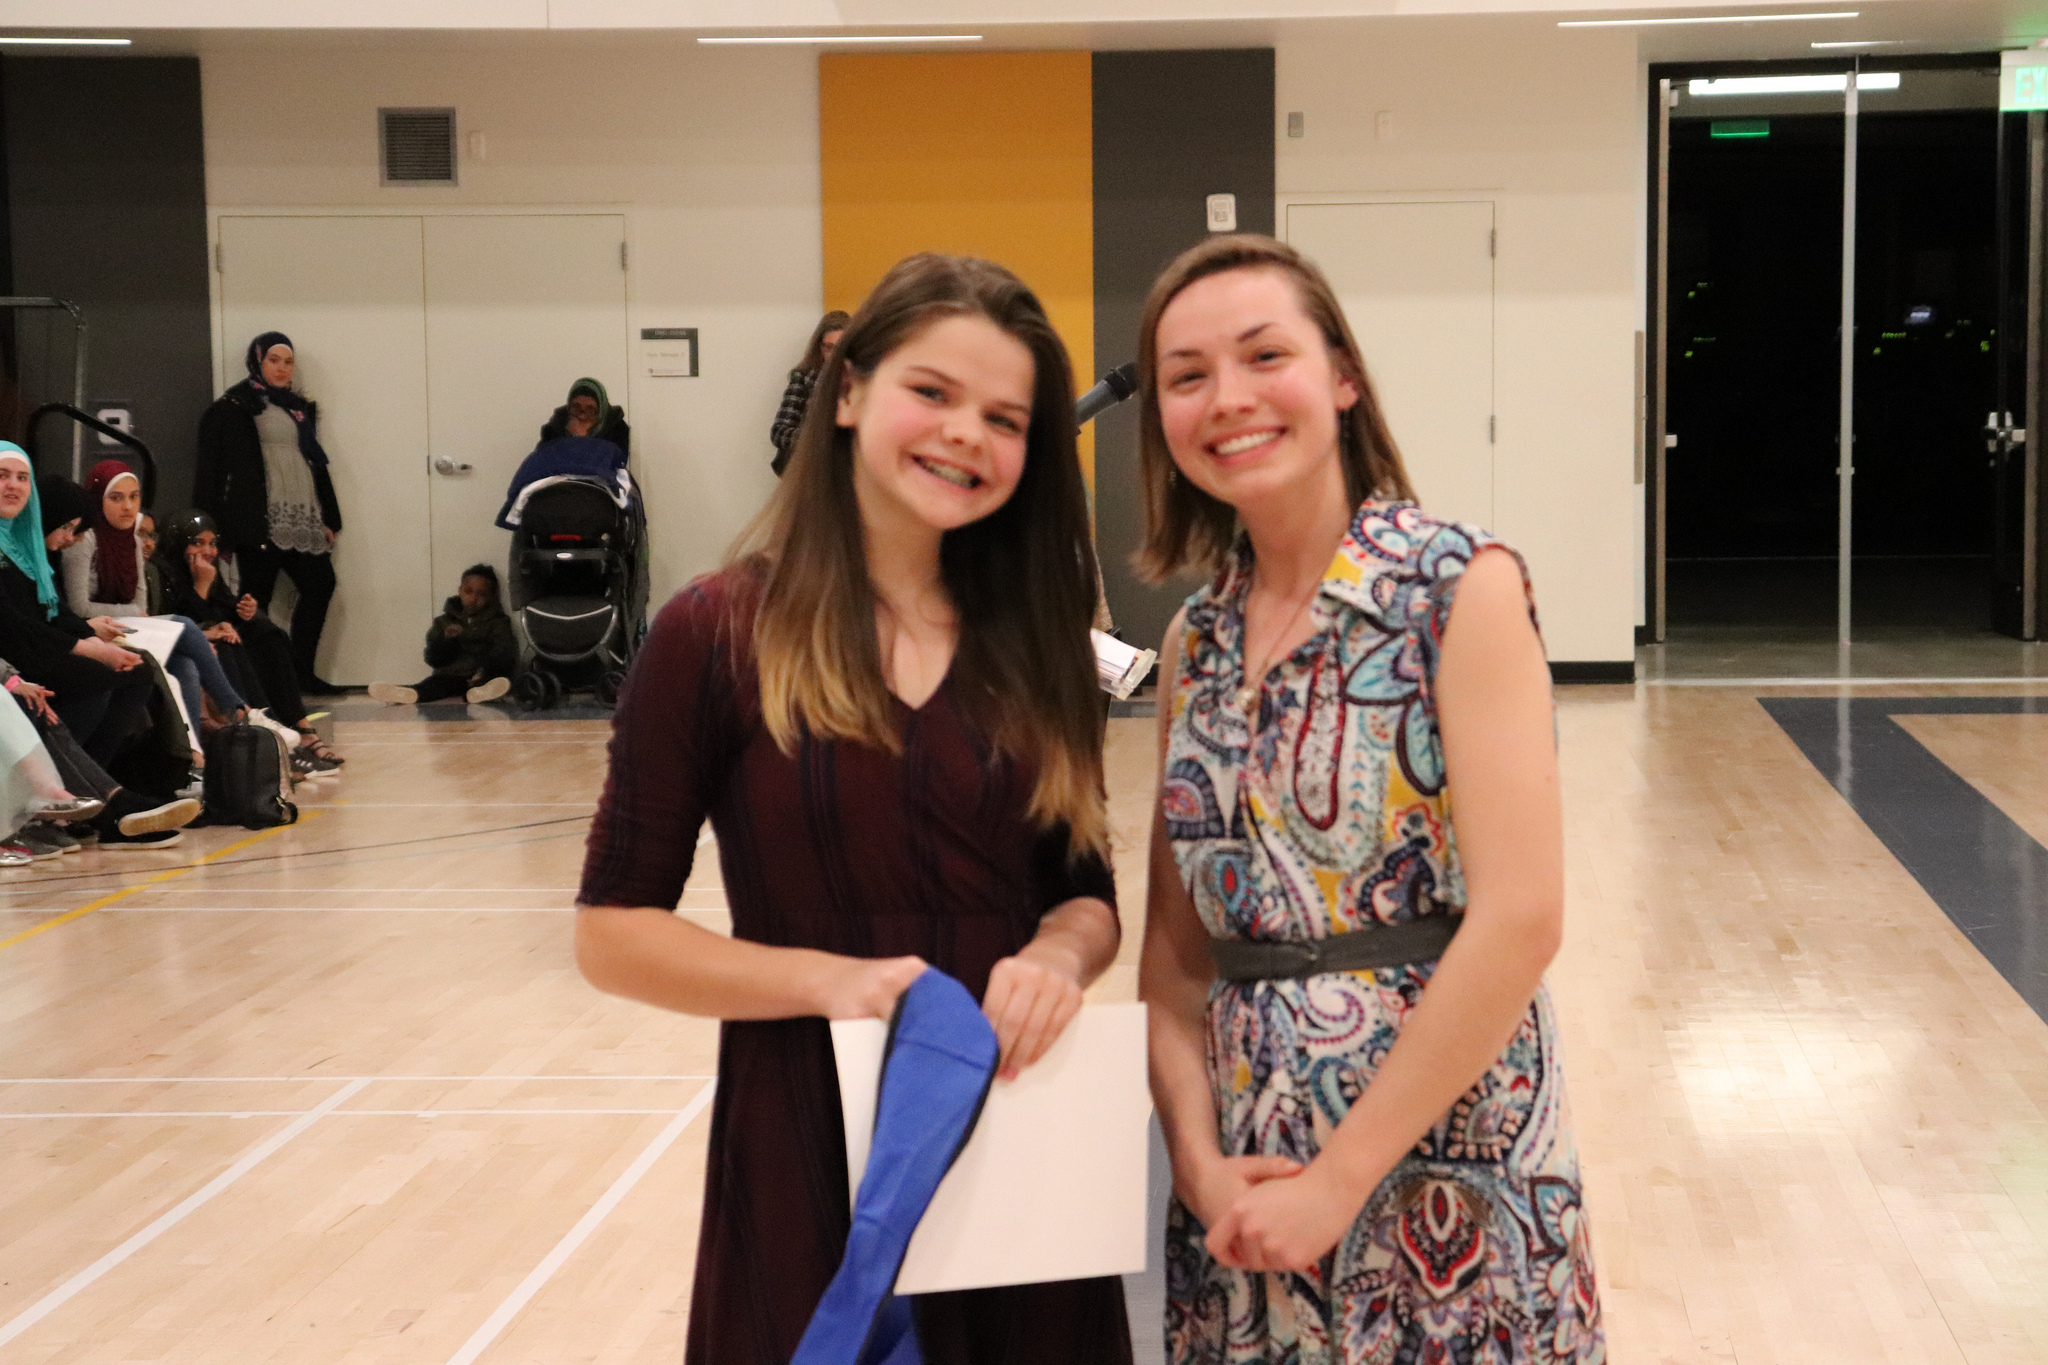  City &amp; County of Denver, Stormwater Education and Outreach, awarded Lia Dino, Skinner Middle School, for her project “Effect of Bio-solid Sludge on the Growth Curve of  E. coli  and the Impact of Antibiotics”. 